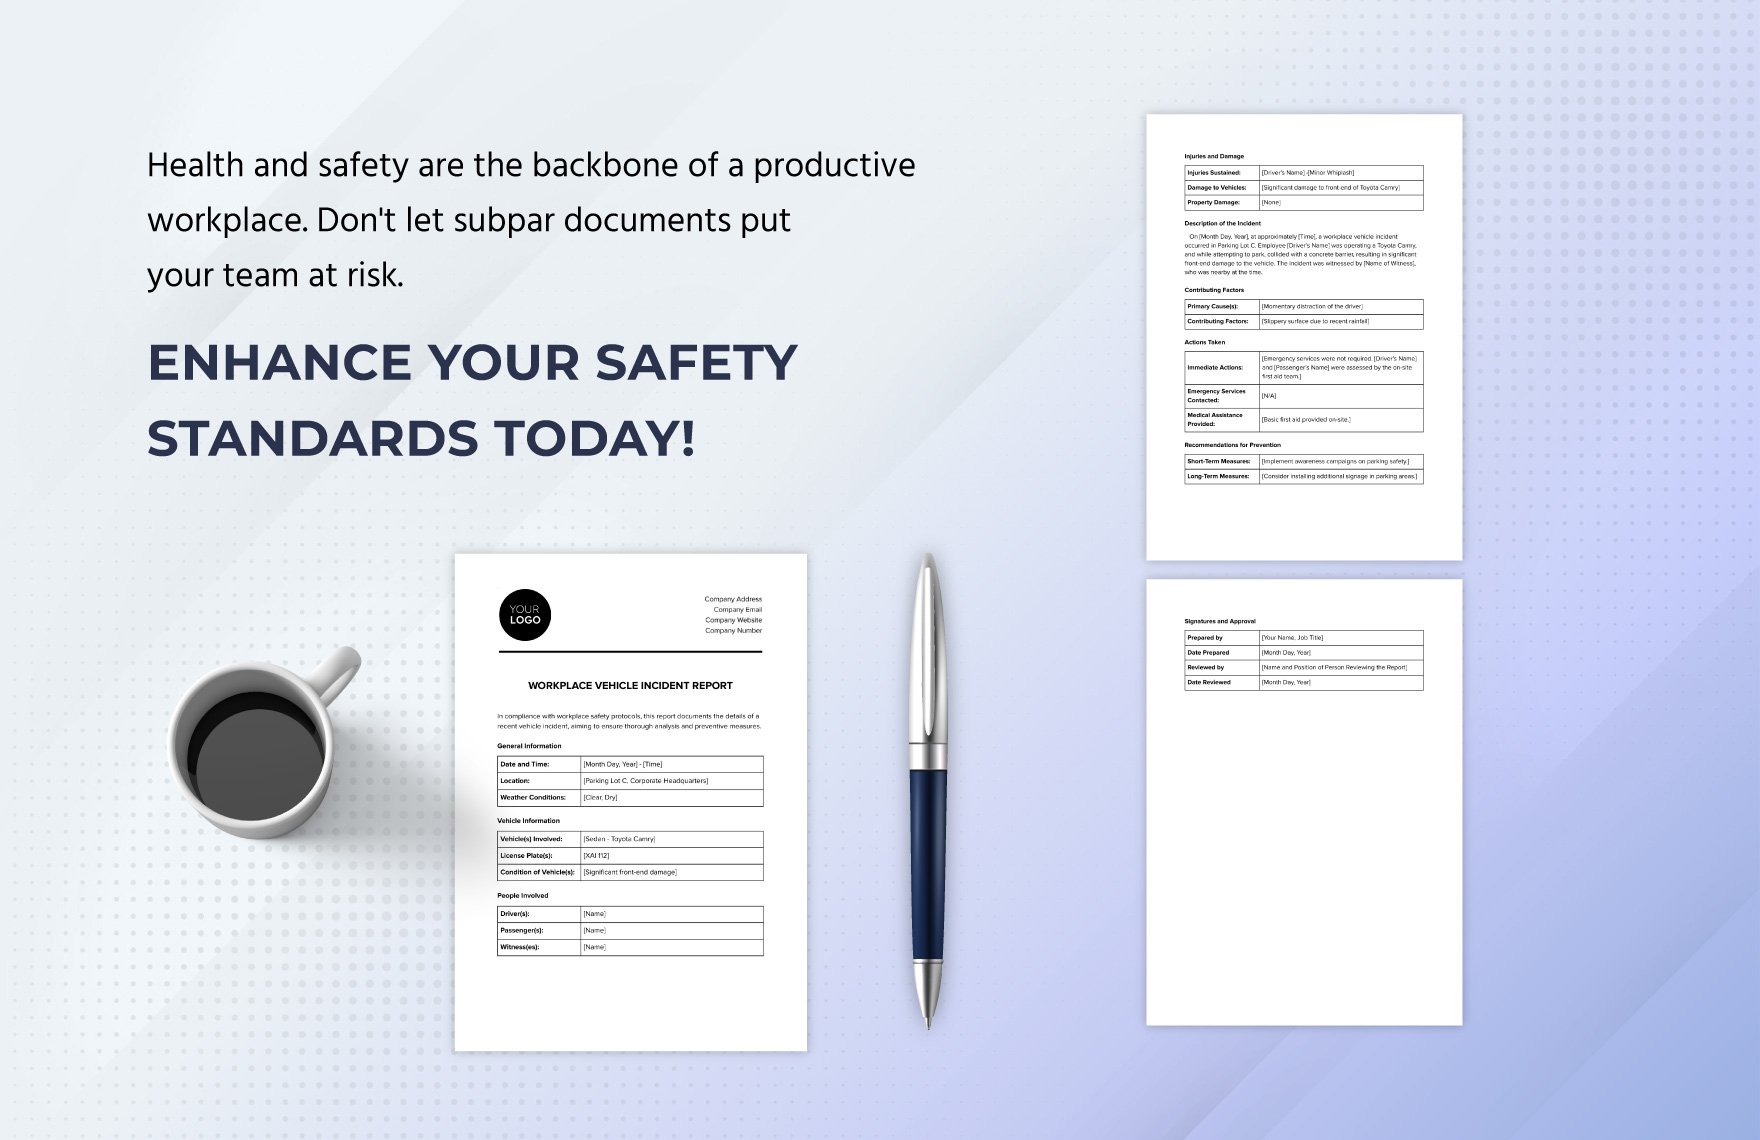 Workplace Vehicle Incident Report Template